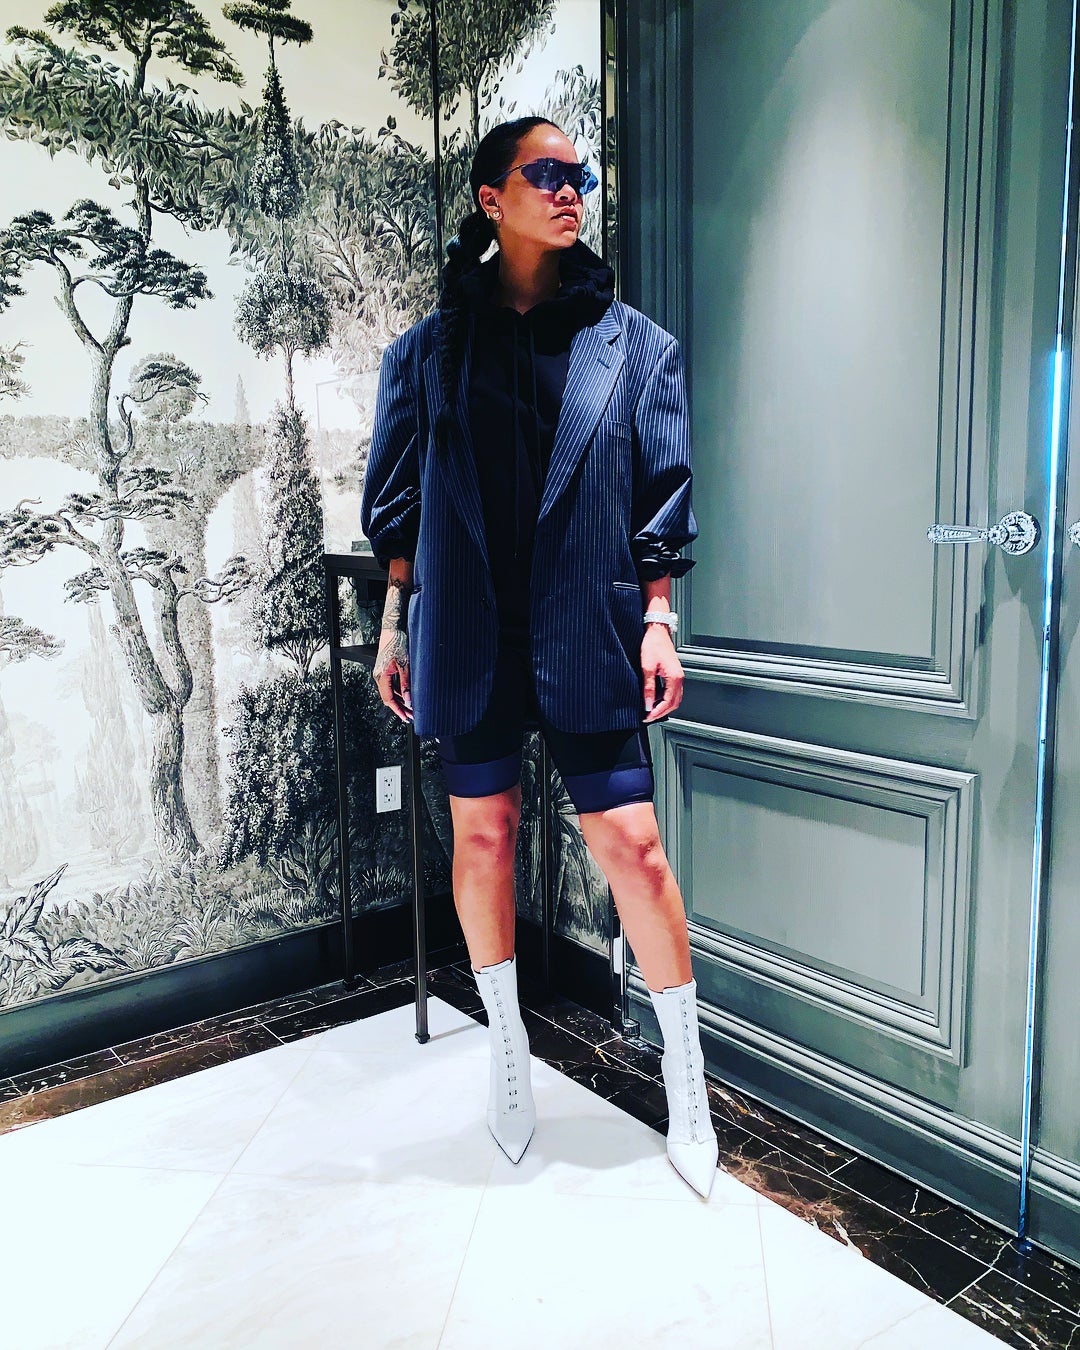 Rihanna Reminds Us All Why She Is The Style Queen